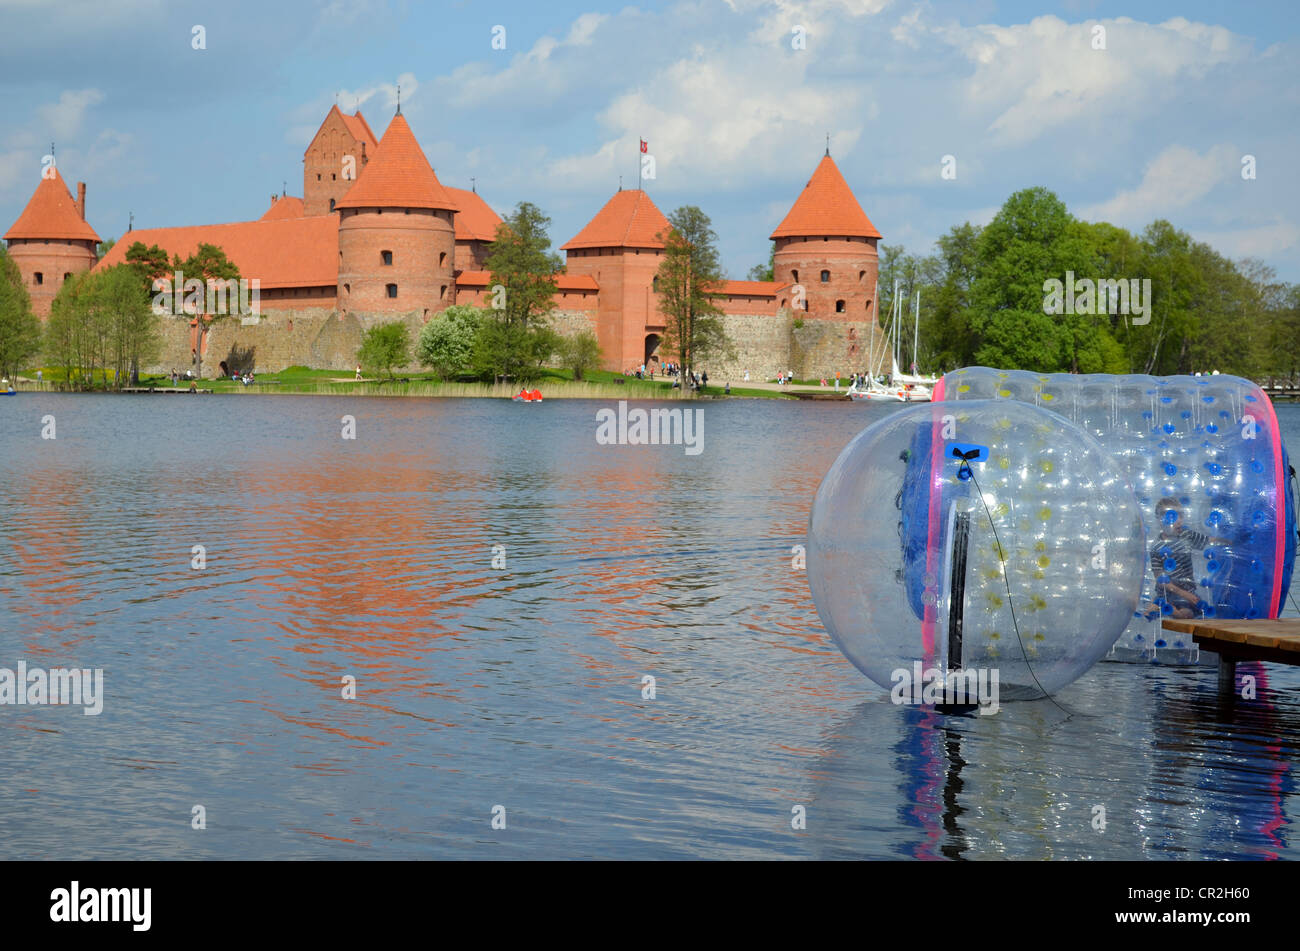 Zorbing air bubbles on water. Trakai Castle surrounded by lake Galve. XIV - XV century architecture in Lithuania. Stock Photo